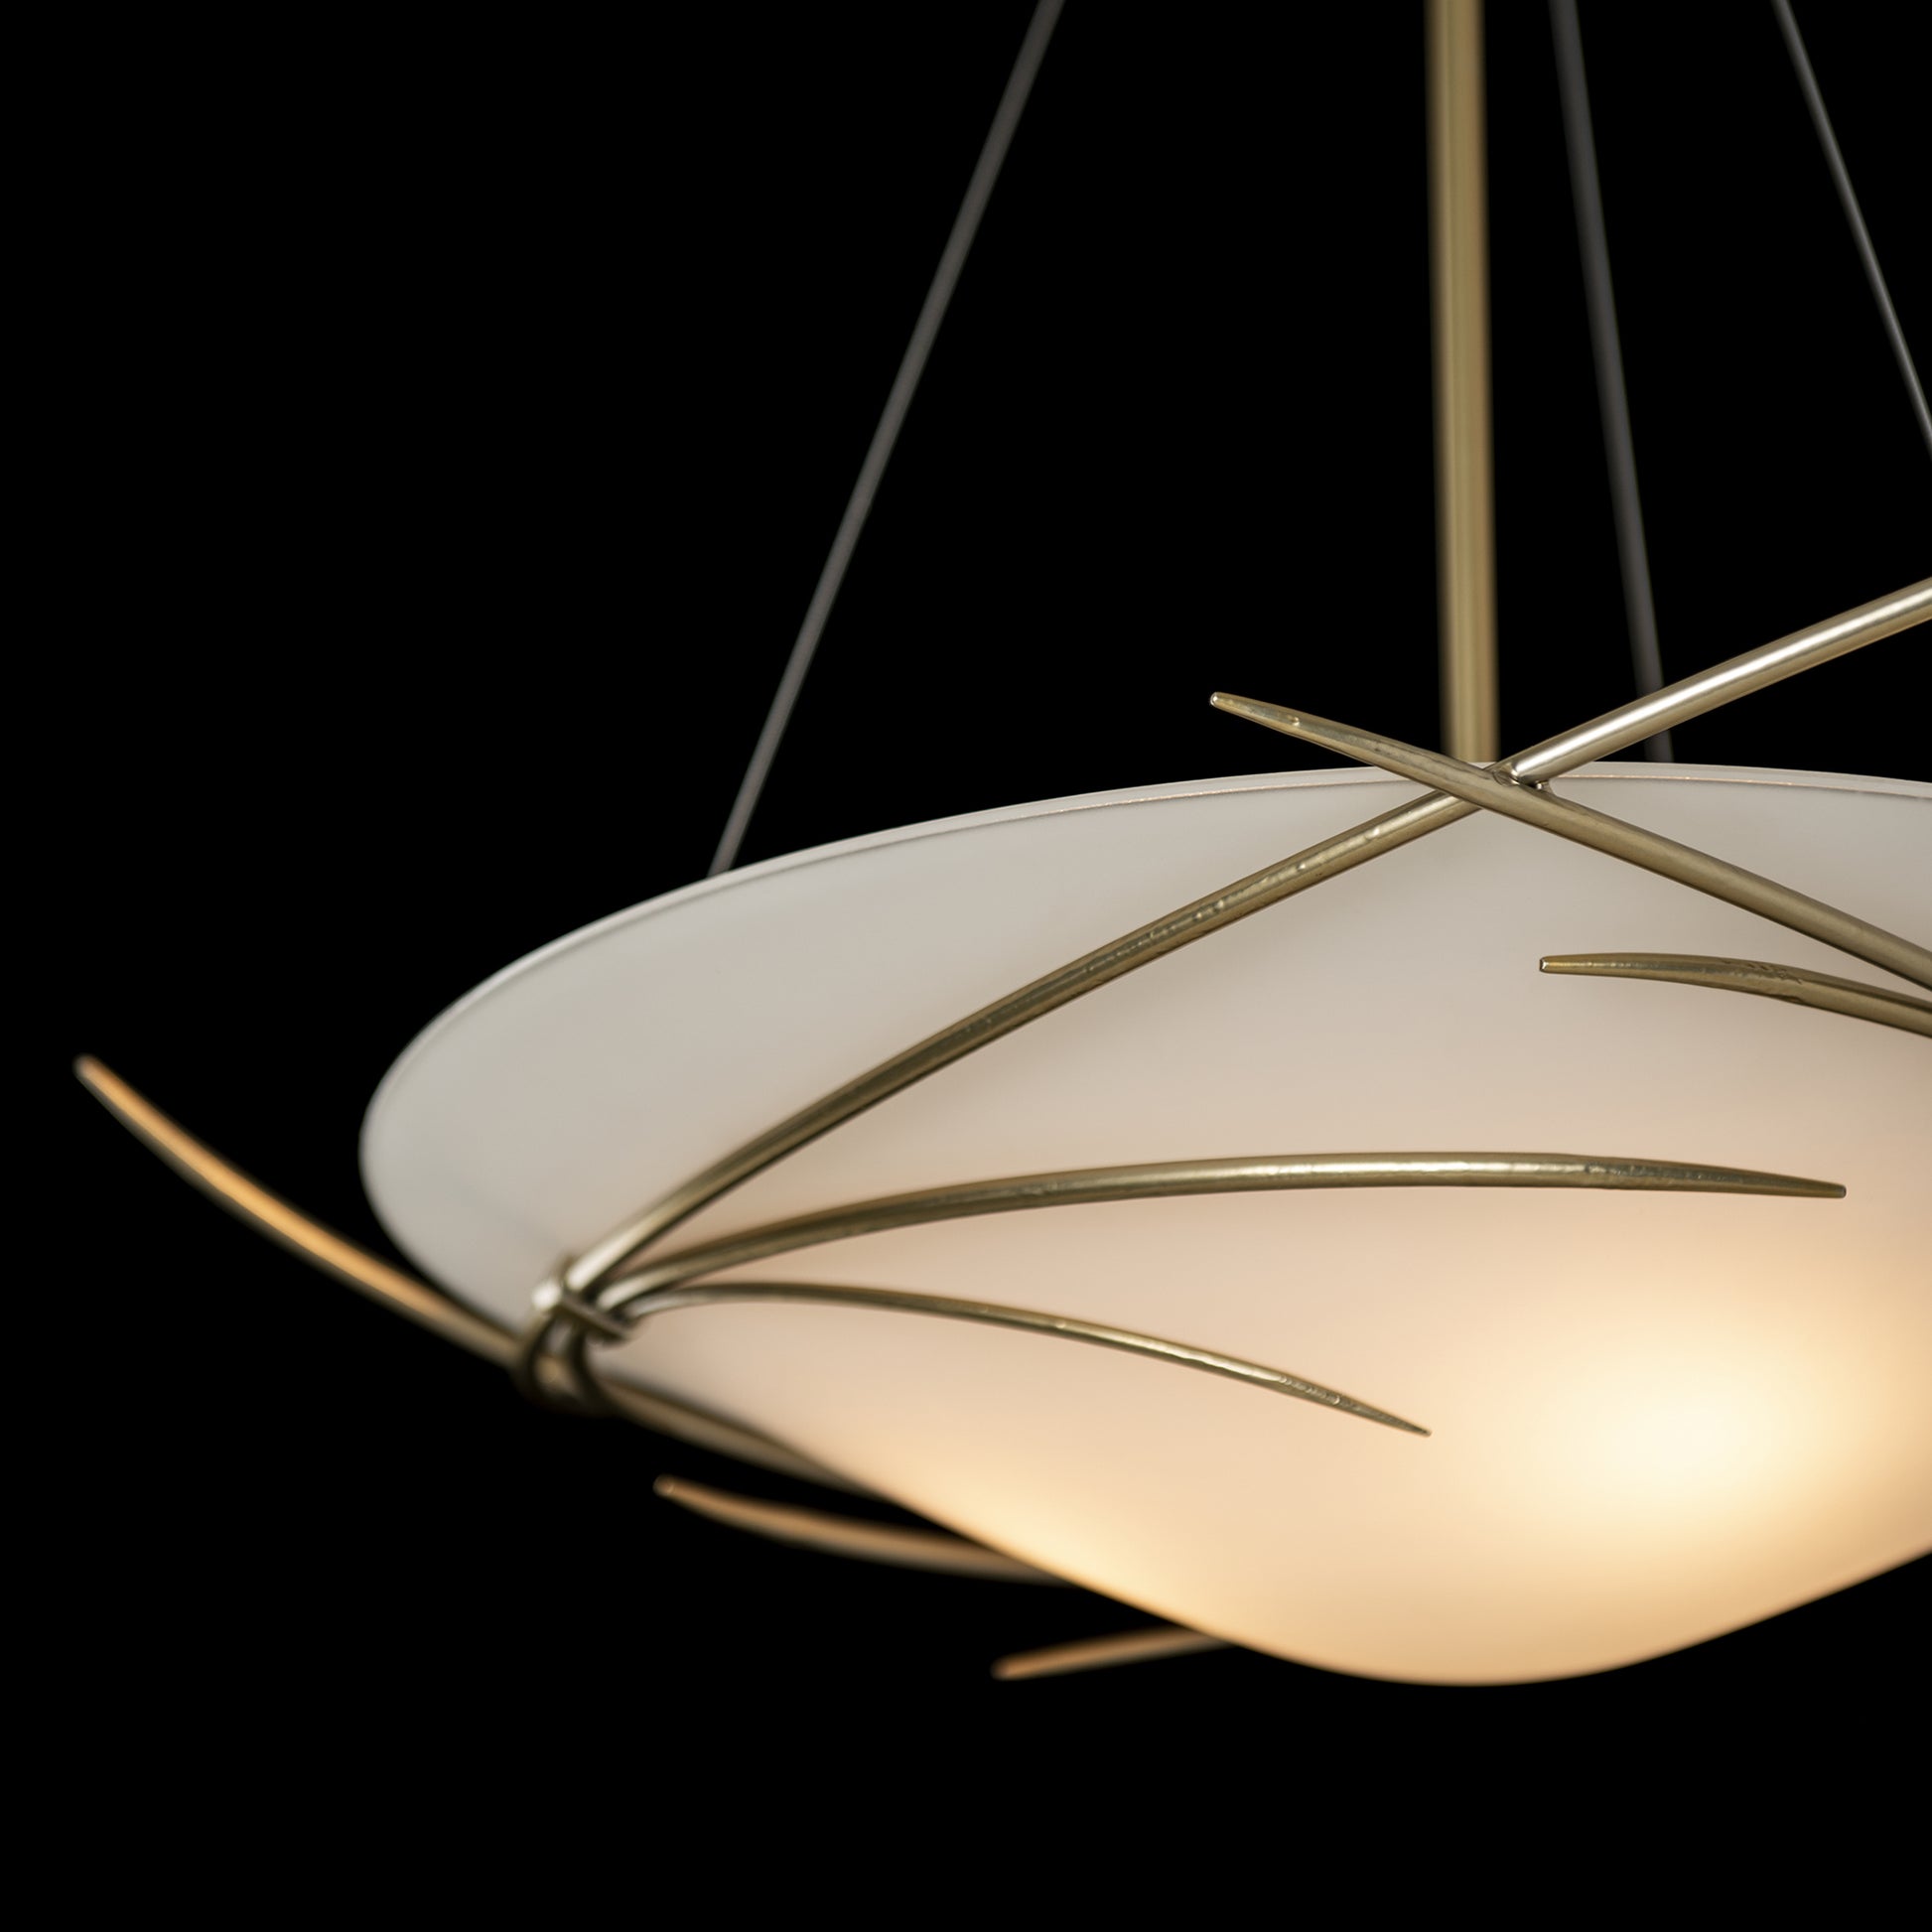 The Hubbardton Forge Wisp Pendant is a stunning light fixture with a gold shade and branches, handcrafted by Hubbardton Forge.